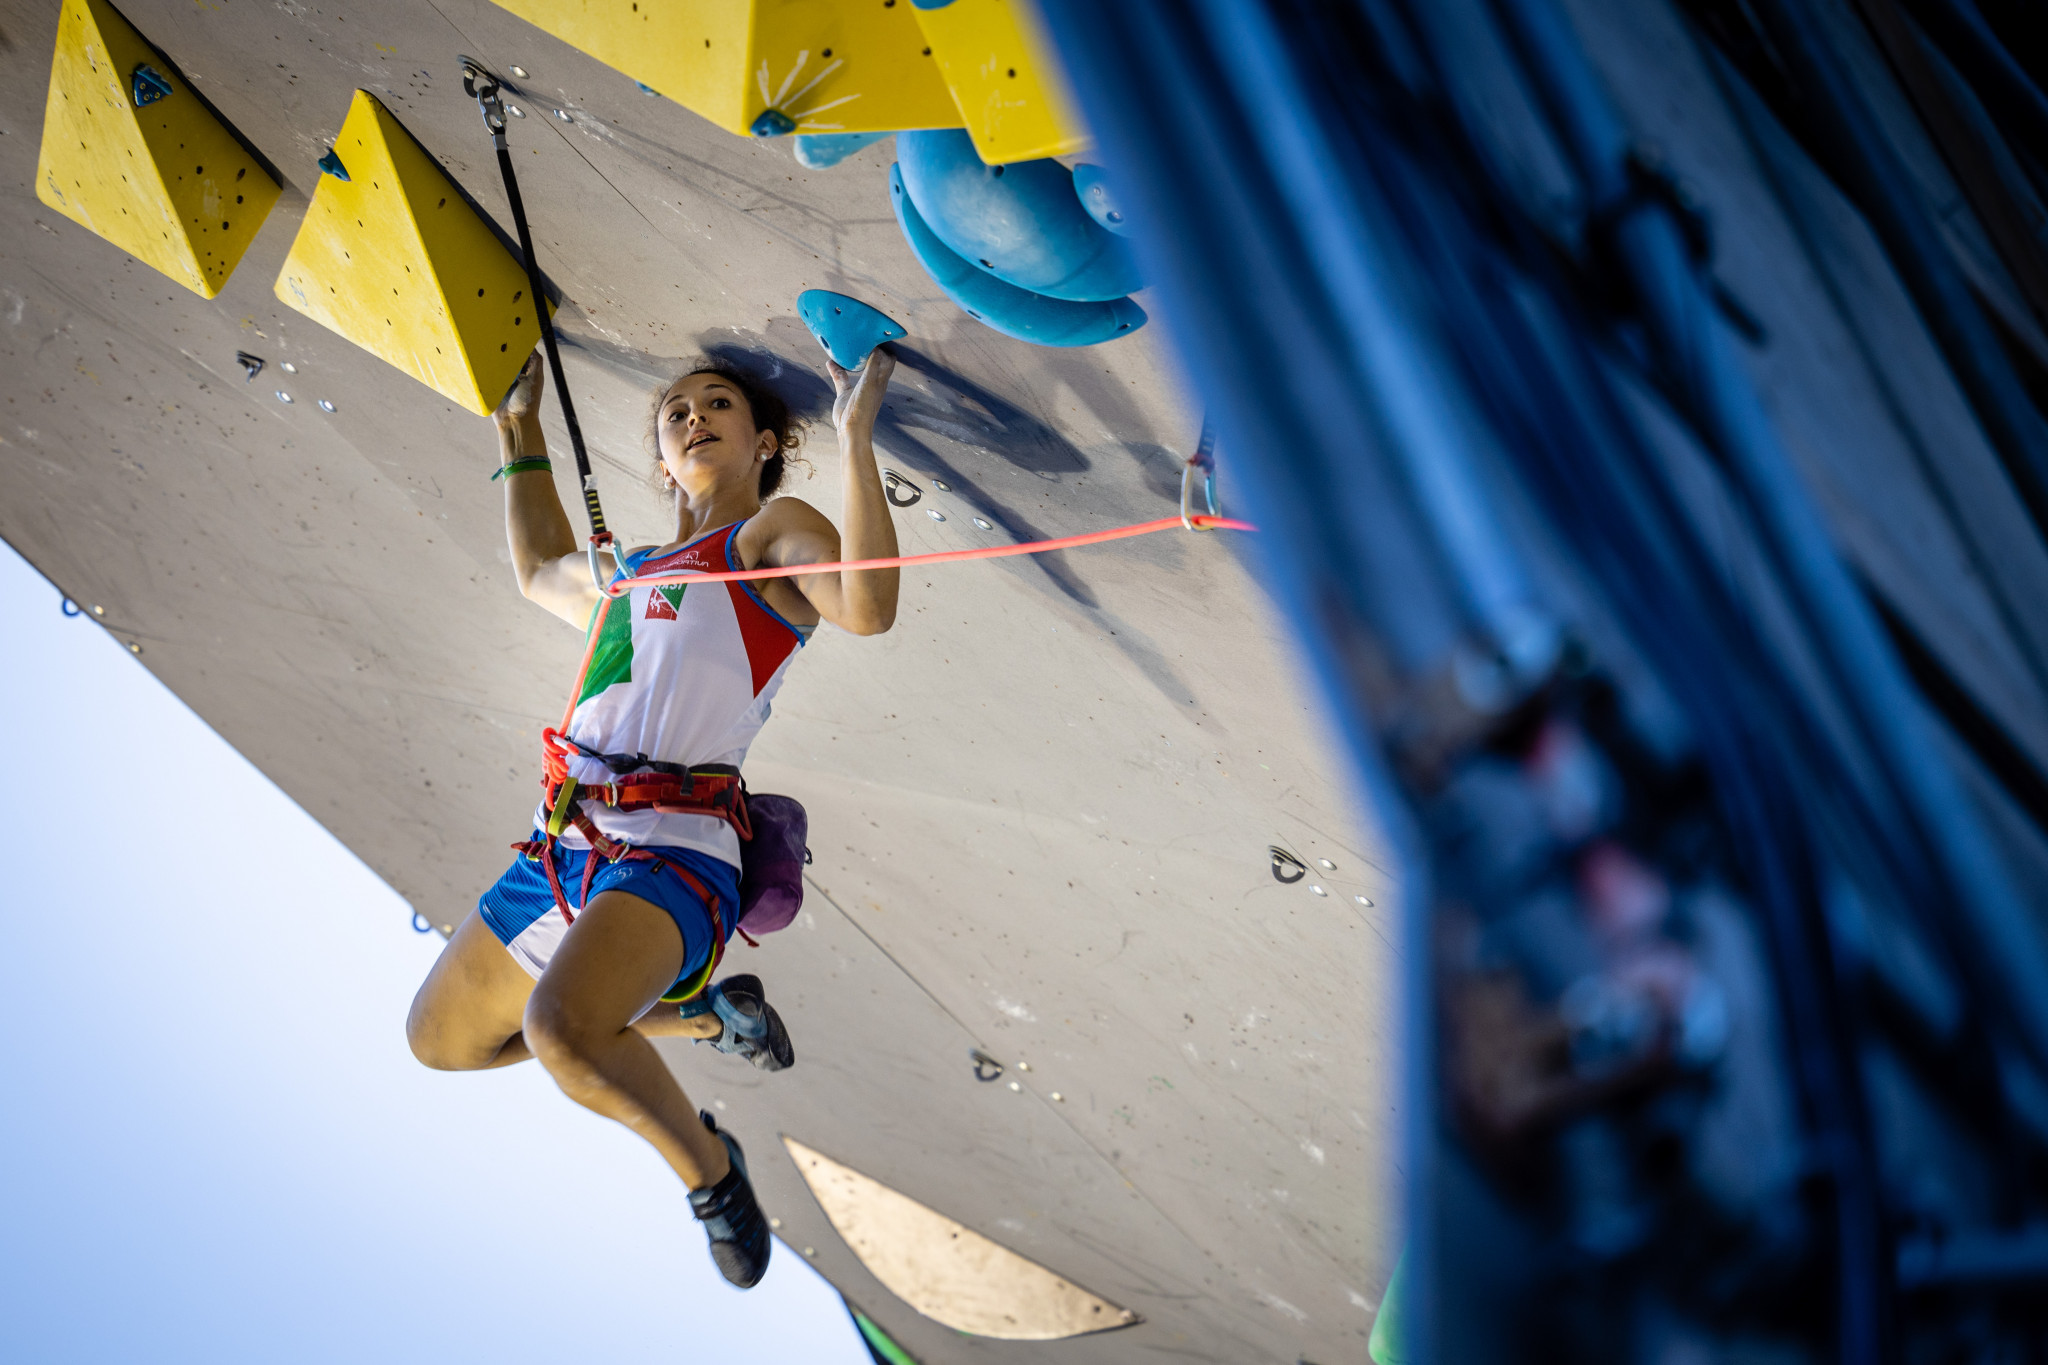 IFSC takes "painful decision" in cancelling two World Cup events